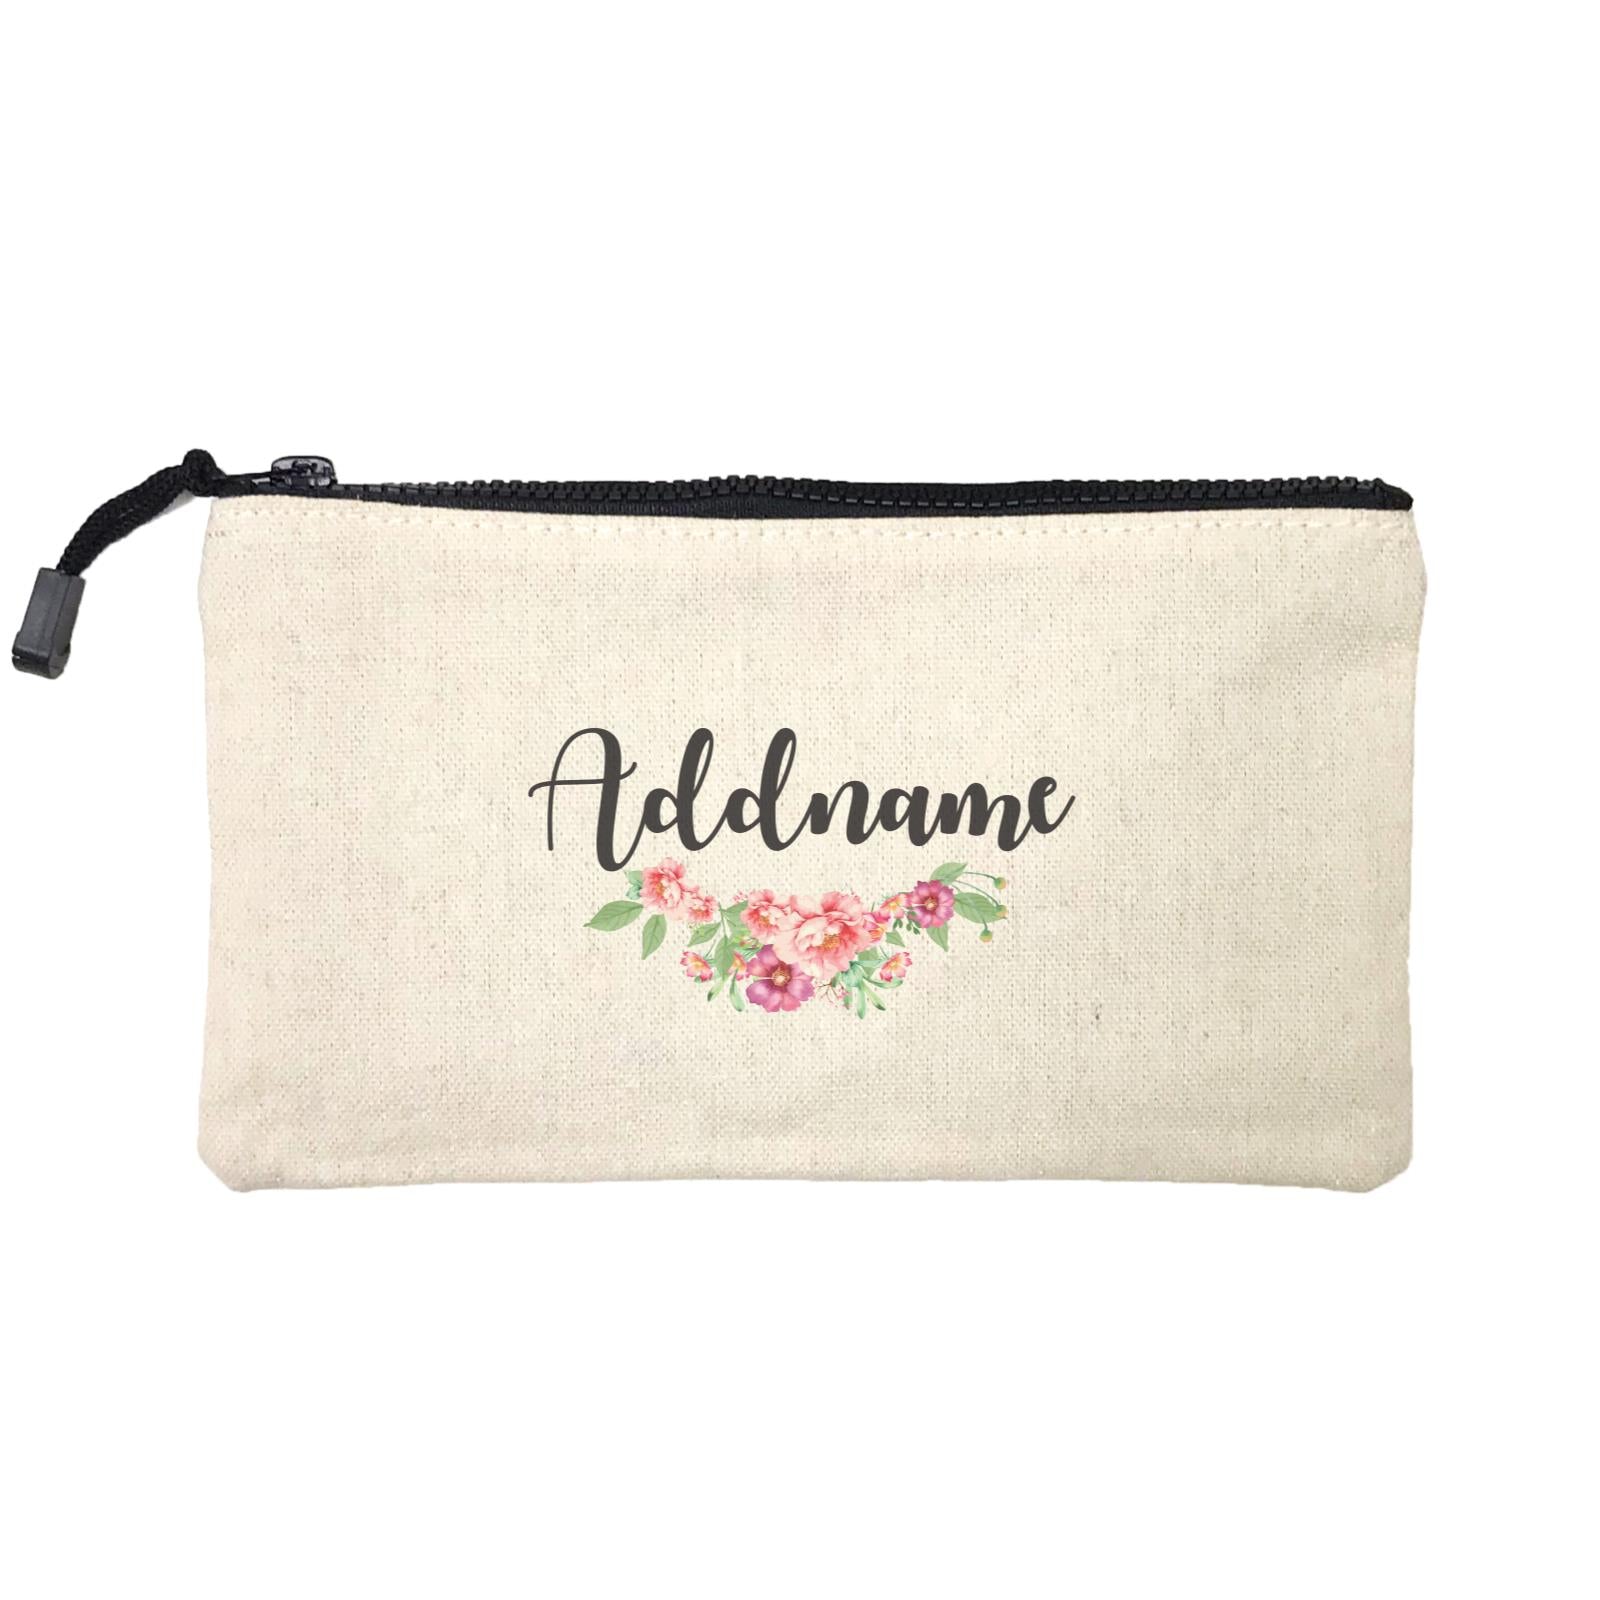 Bridesmaid Floral Sweet Coral Flower Addname Mini Accessories Stationery Pouch